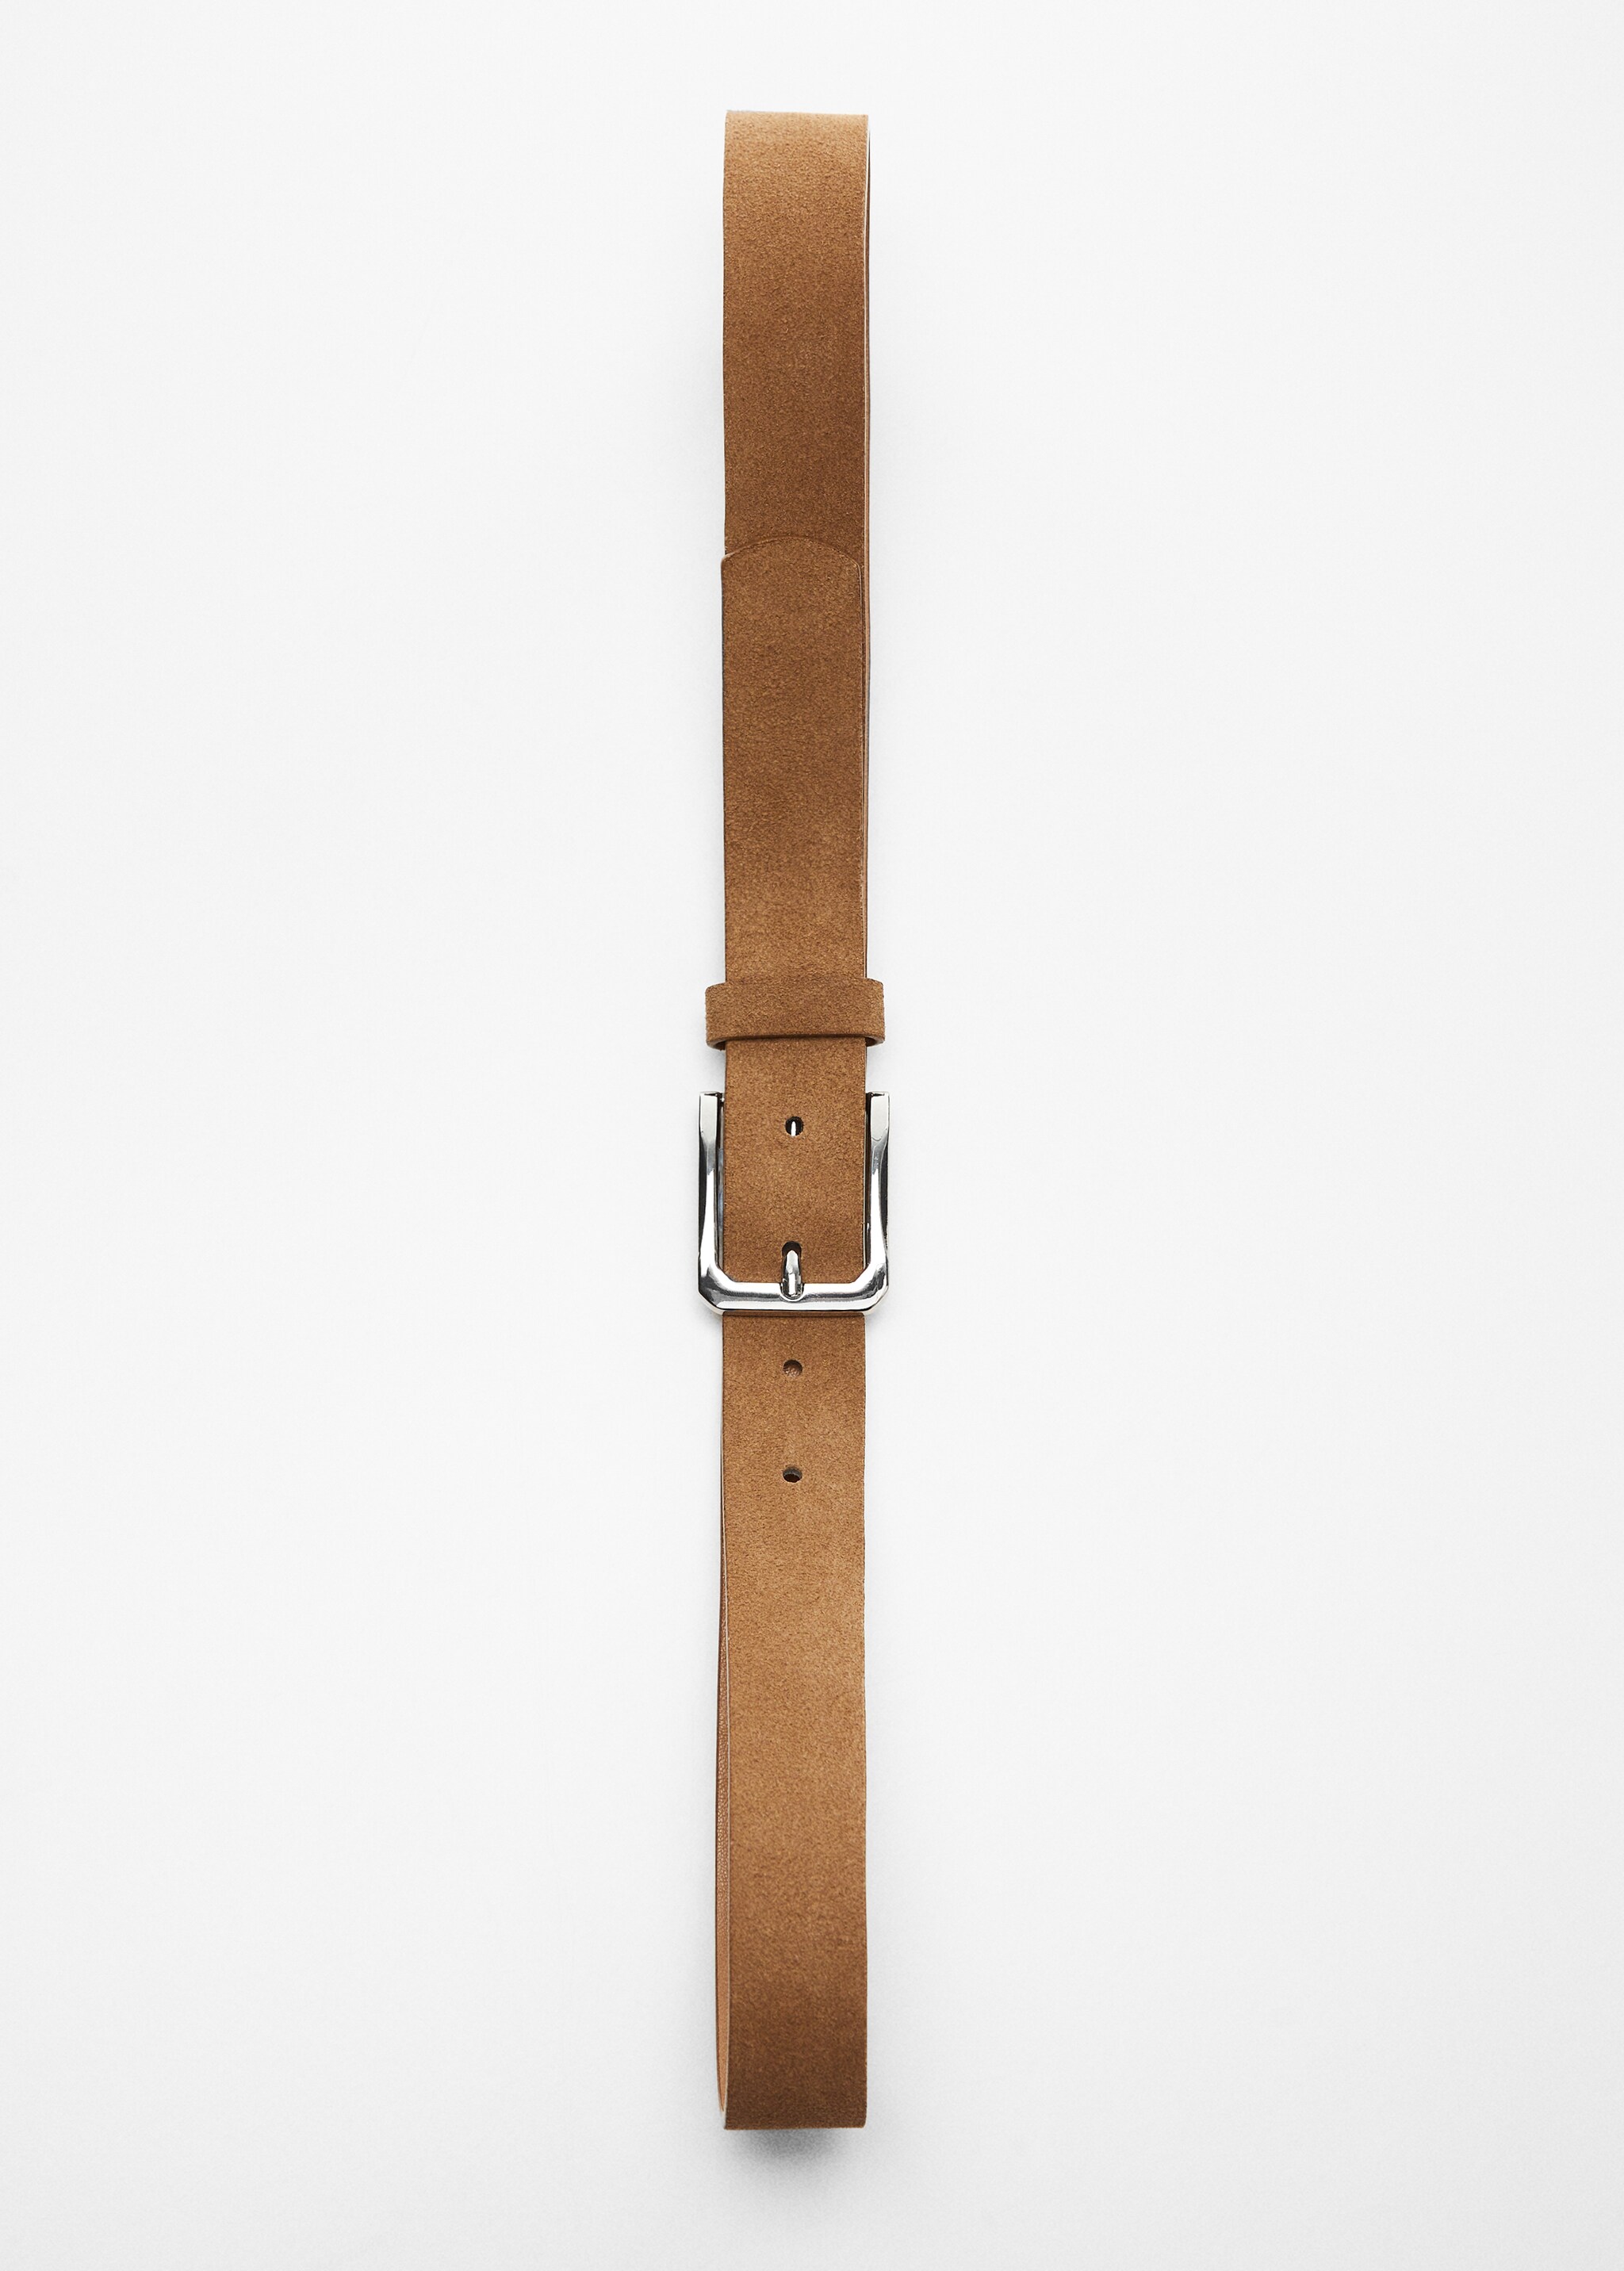 Suede belt - Details of the article 5